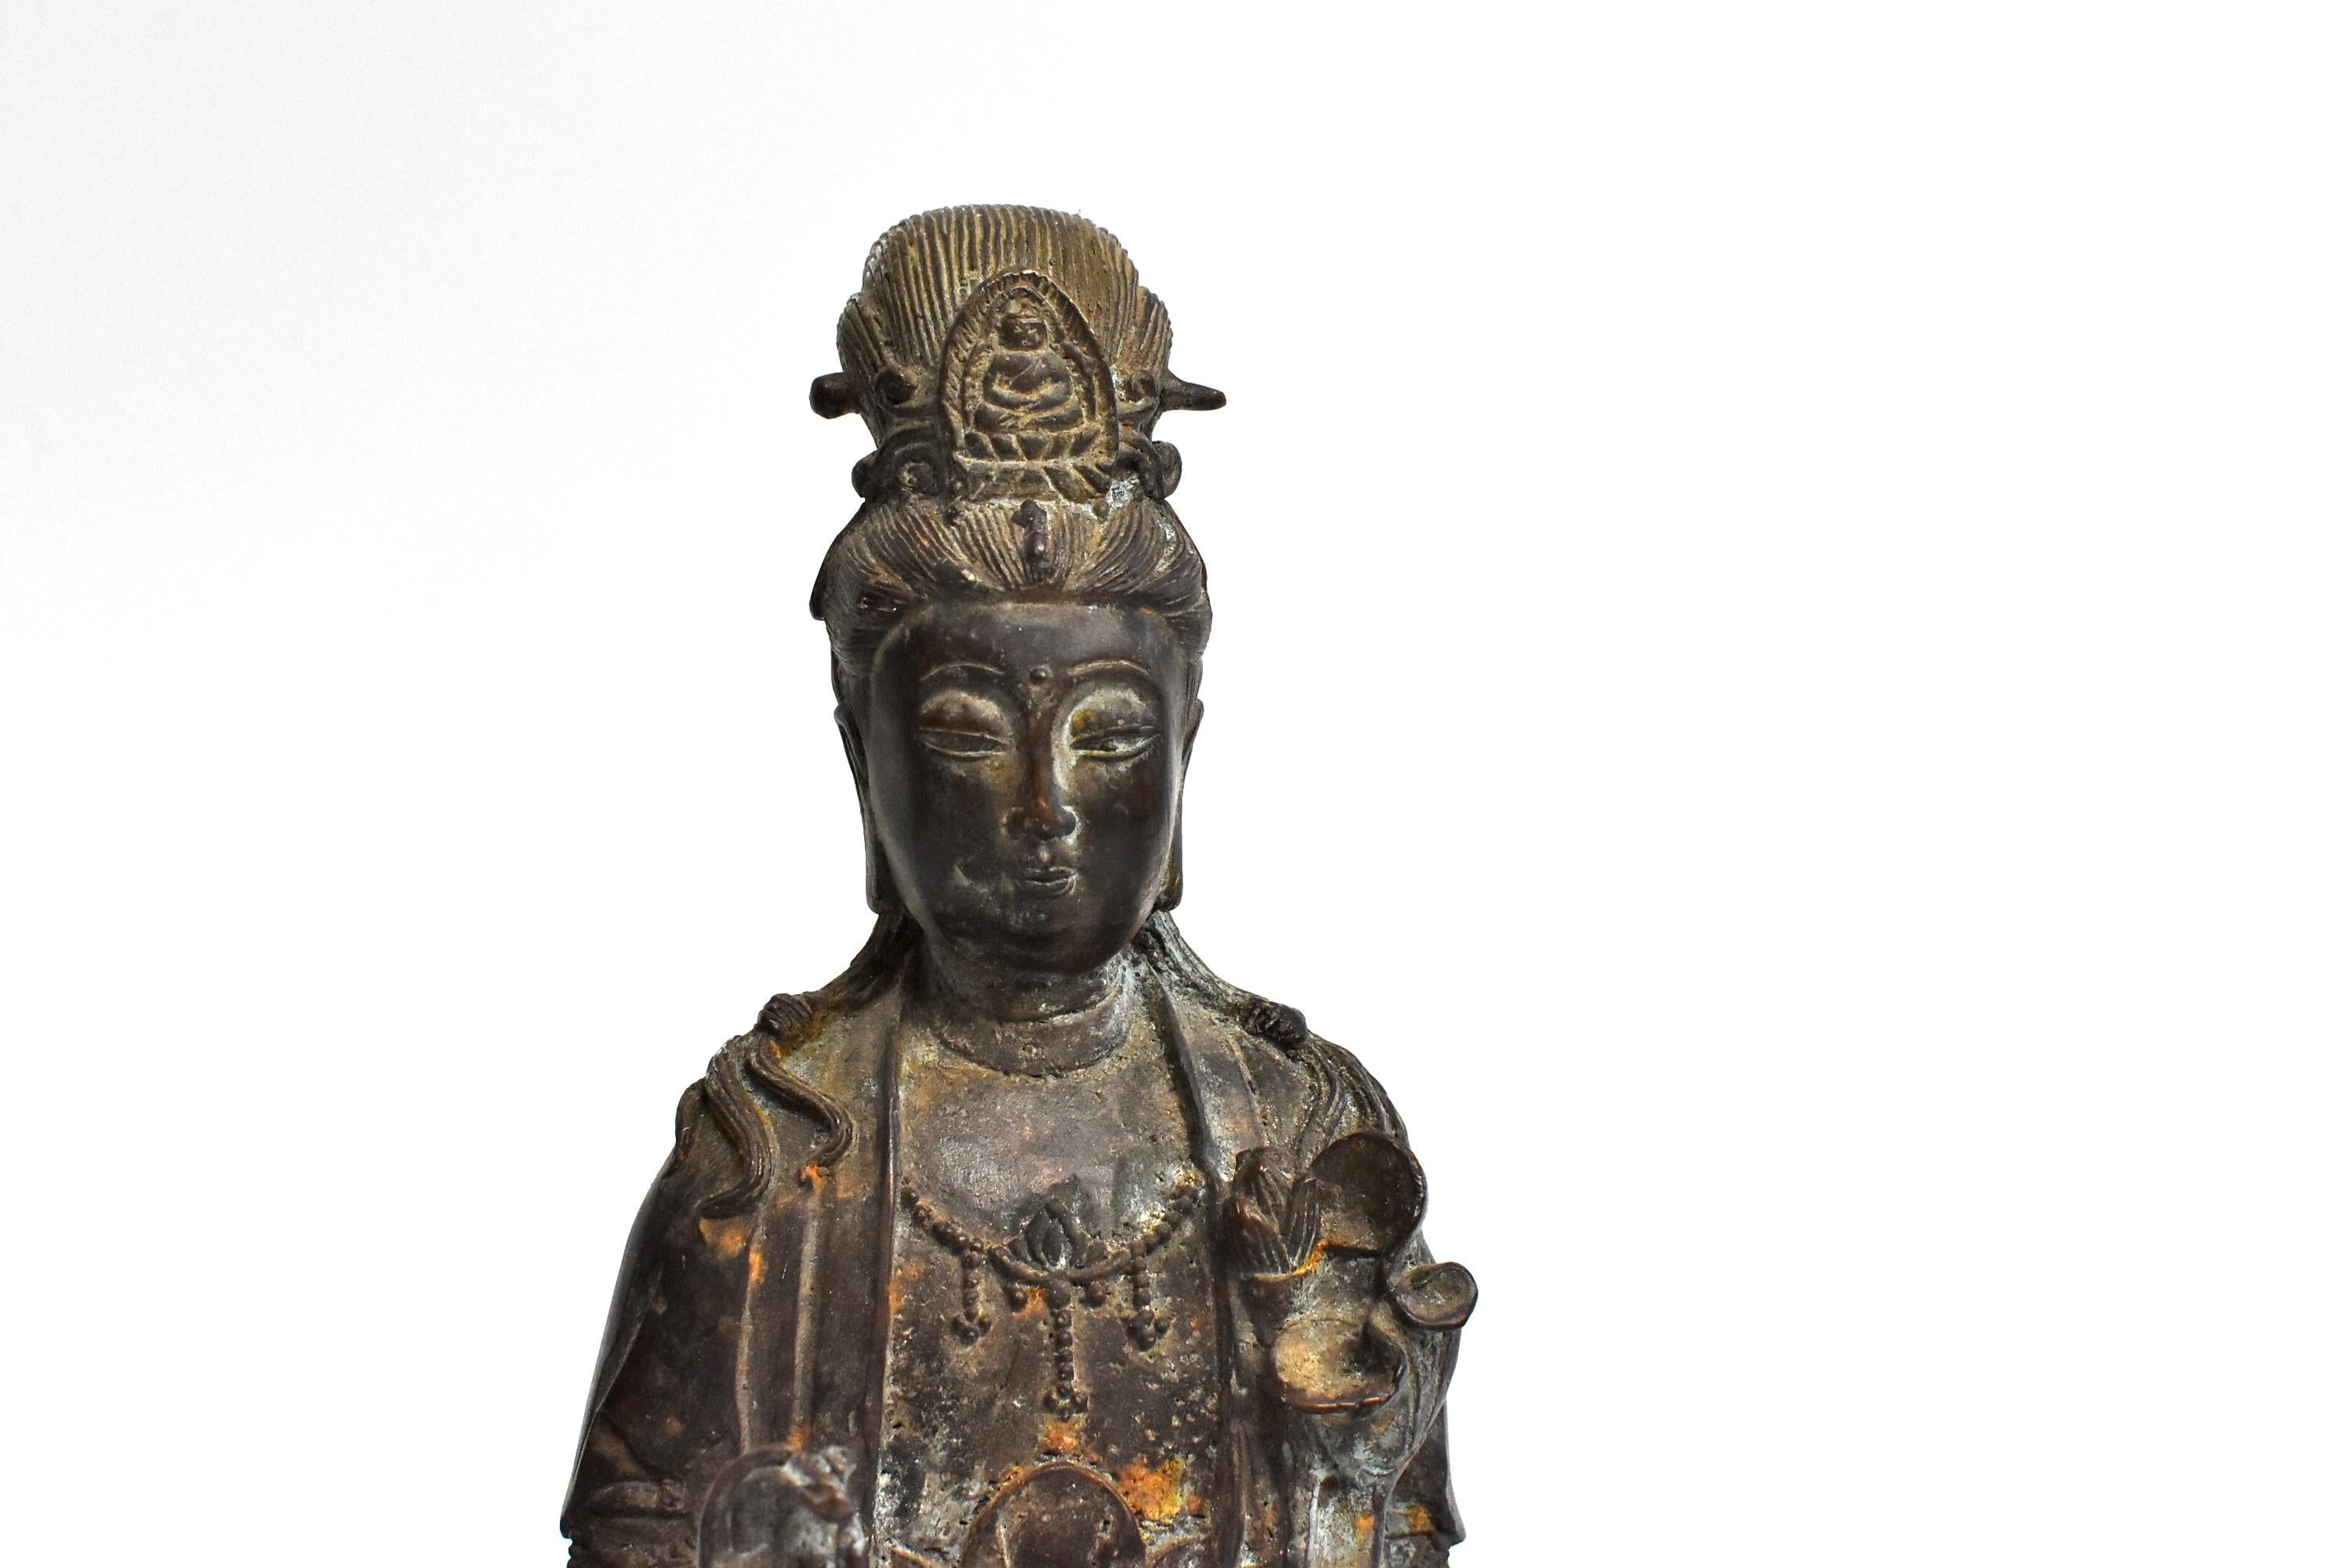 A wonderful old piece of bronze sculpture featuring the Chinese Goddess of Compassion Kwan Yin. She sits on an recumbent elephant and holds a willow branch. Her right hand shows the motion to flicking blessing water from the willow. Kwan Yin's face